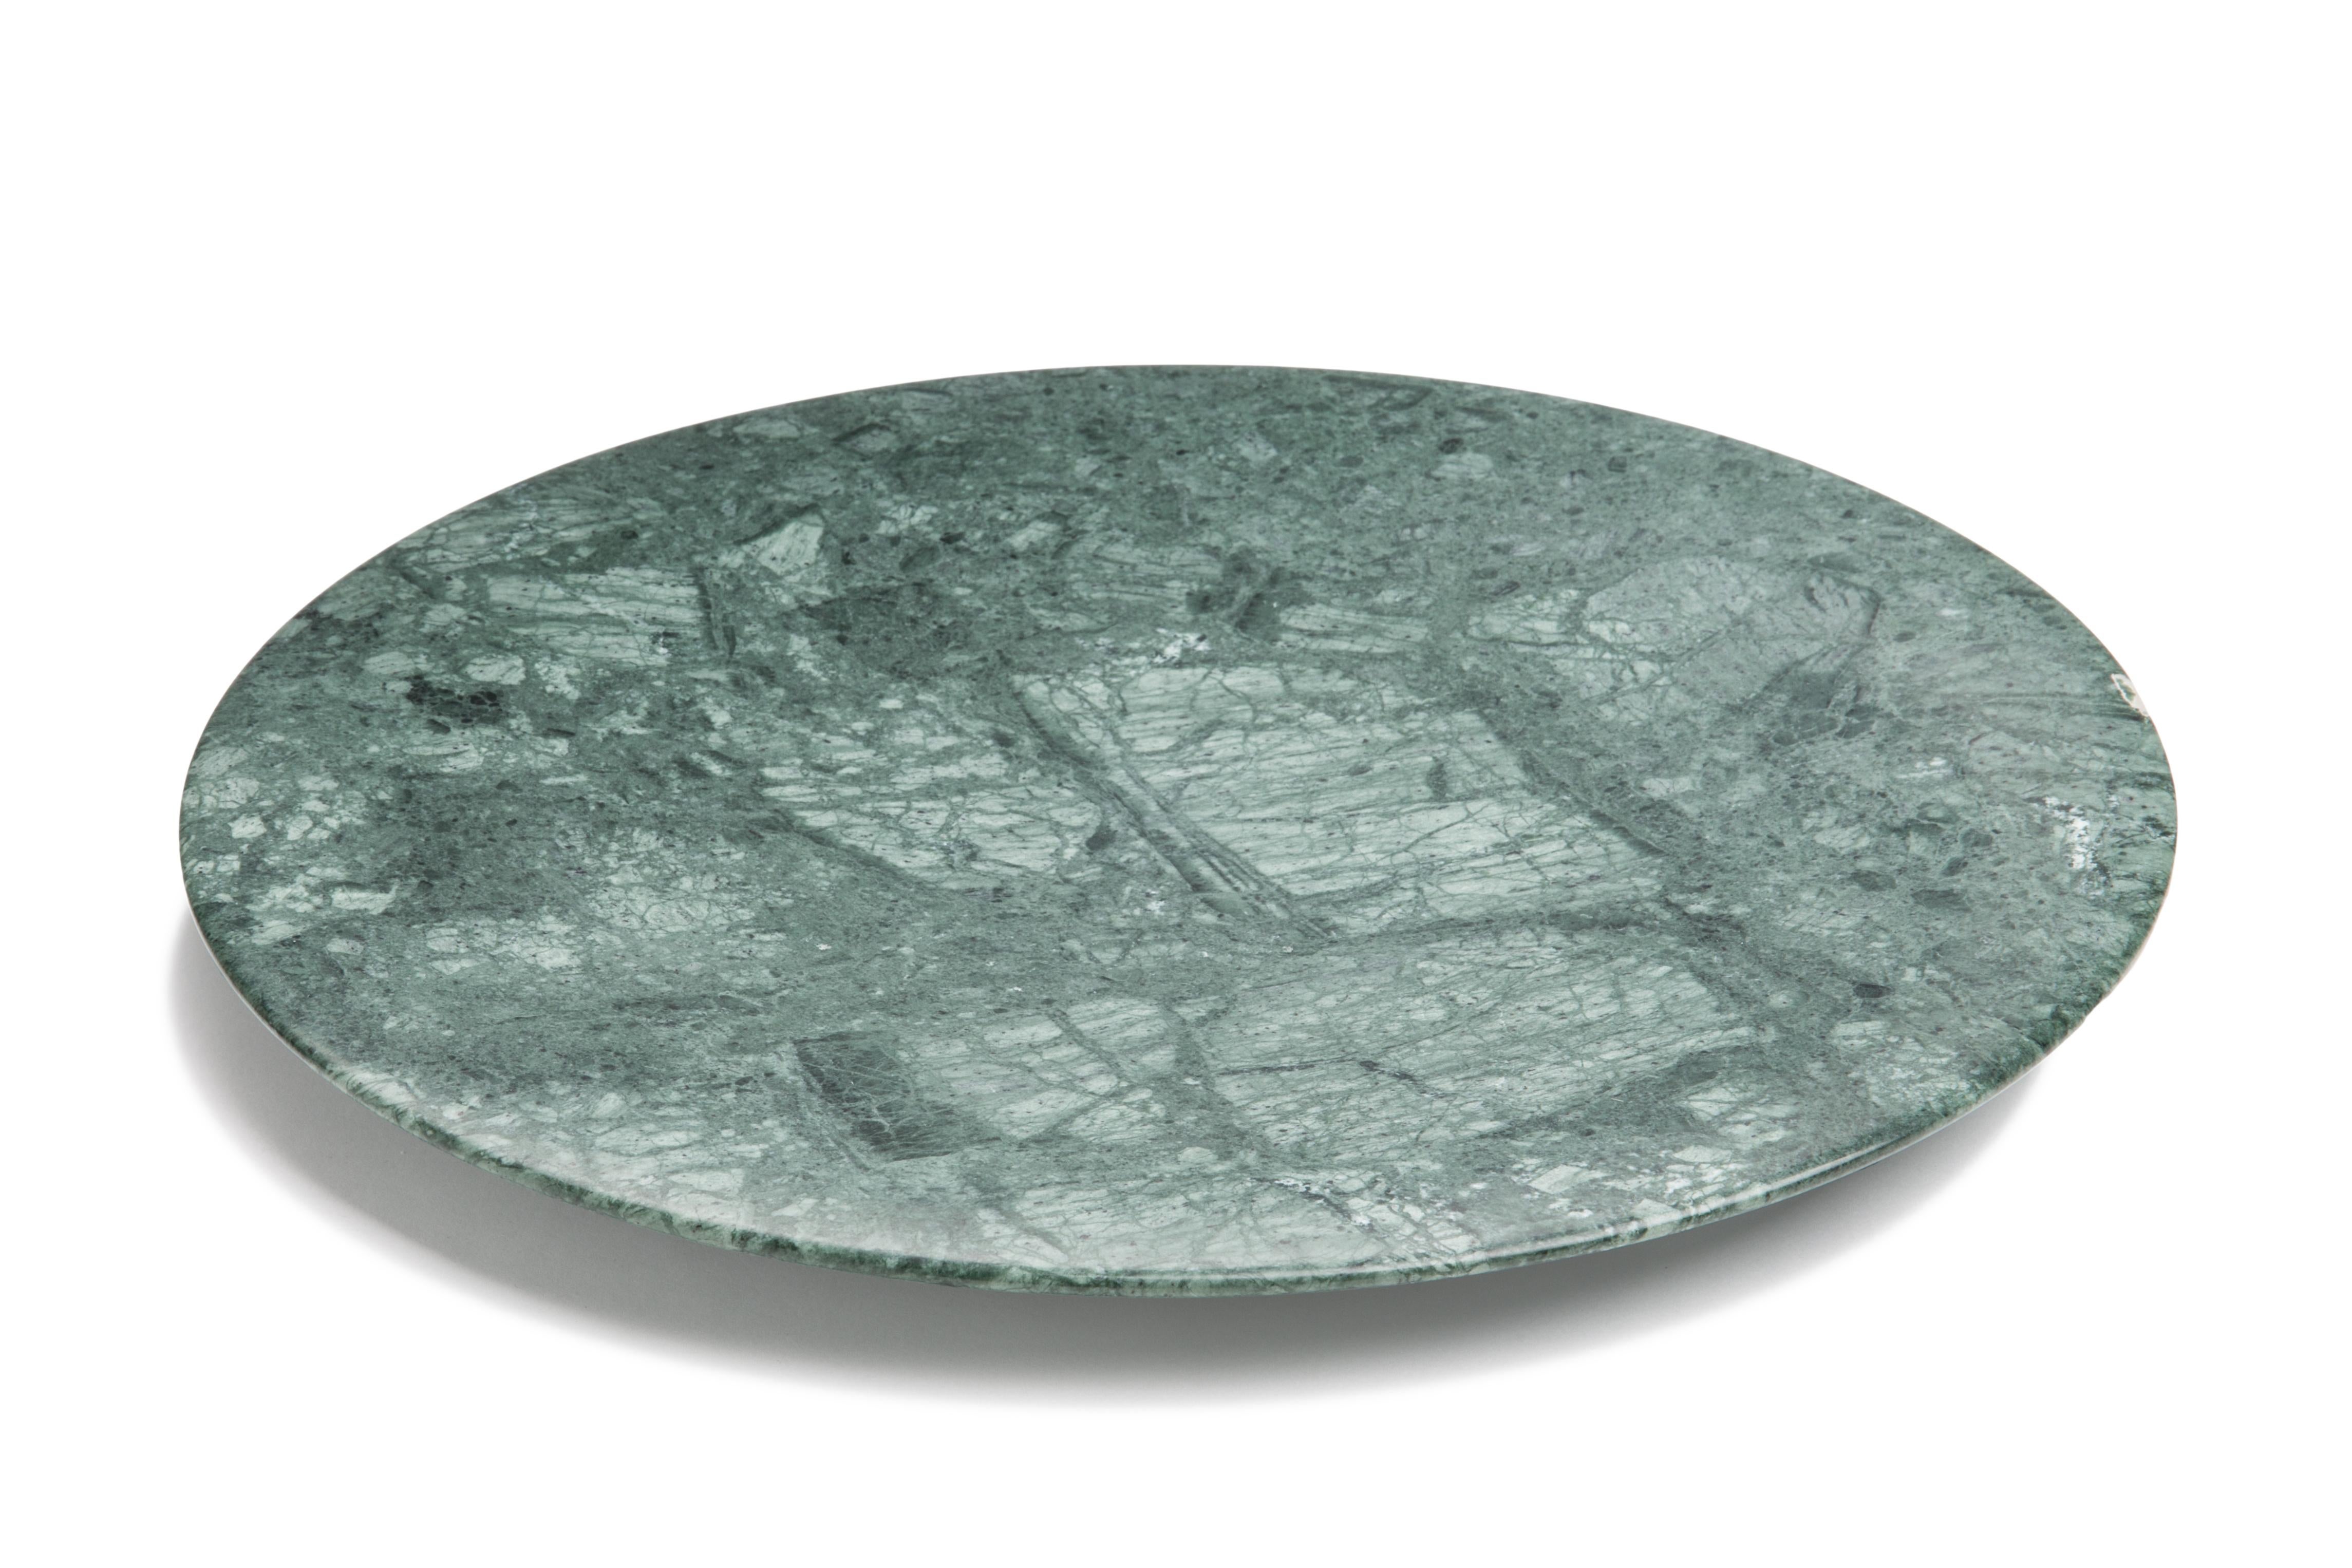 This stunning tray, made from Guatemala green marble, evokes the Renaissance concept of man being at the centre of space and nature with its circular shape. The circle is rich in symbolism in European history and art. The fusion of these two